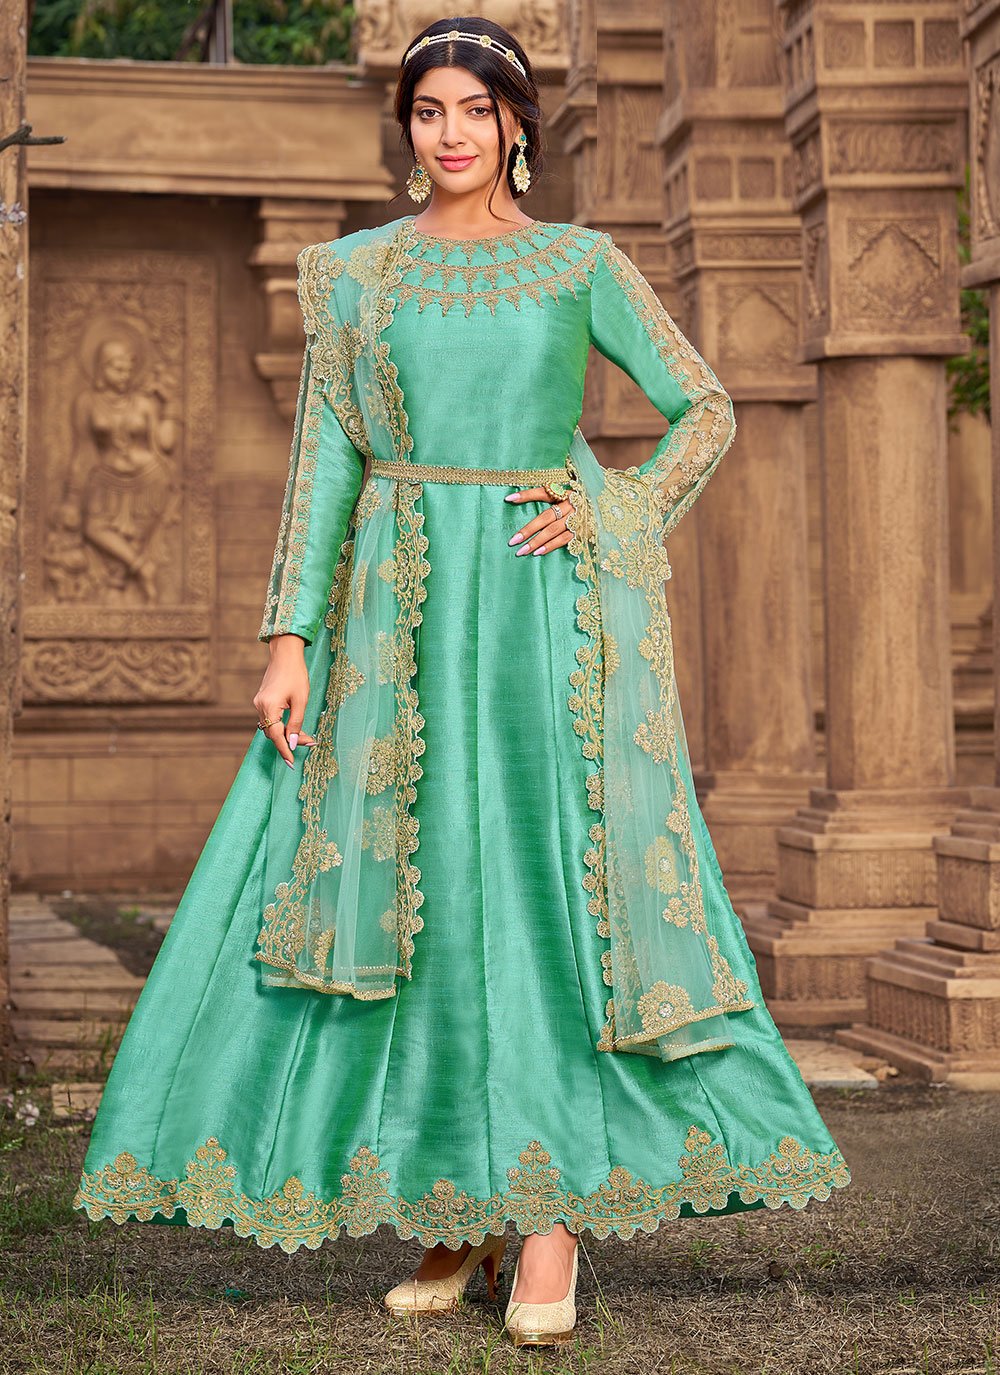 Discover more than 269 sea green anarkali suit super hot